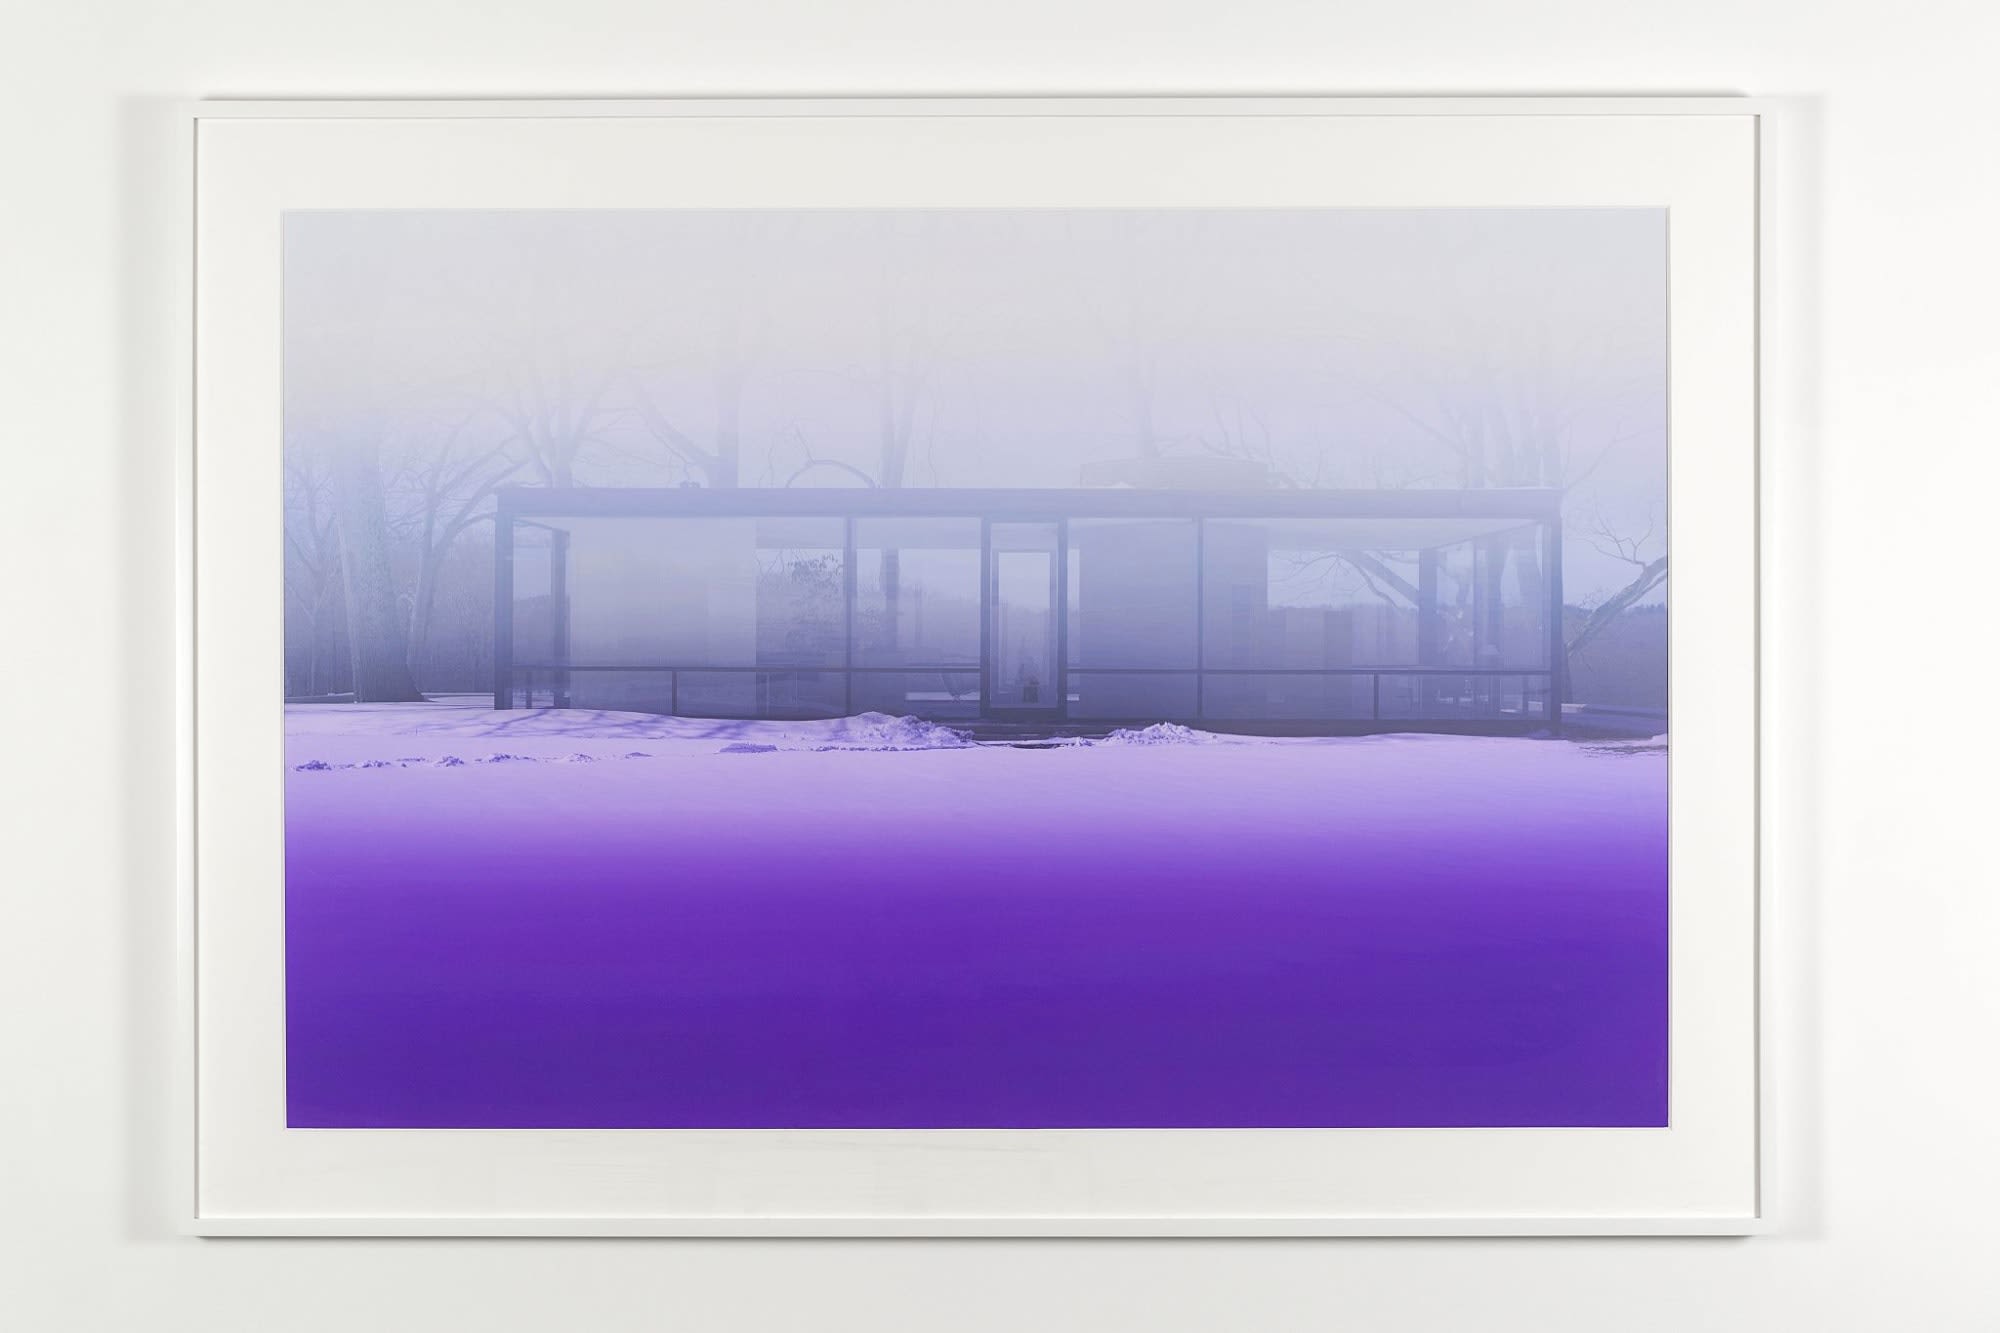 Monochromatic purple photograph of a rectangular glass building in a winter landscape on an overcast day.